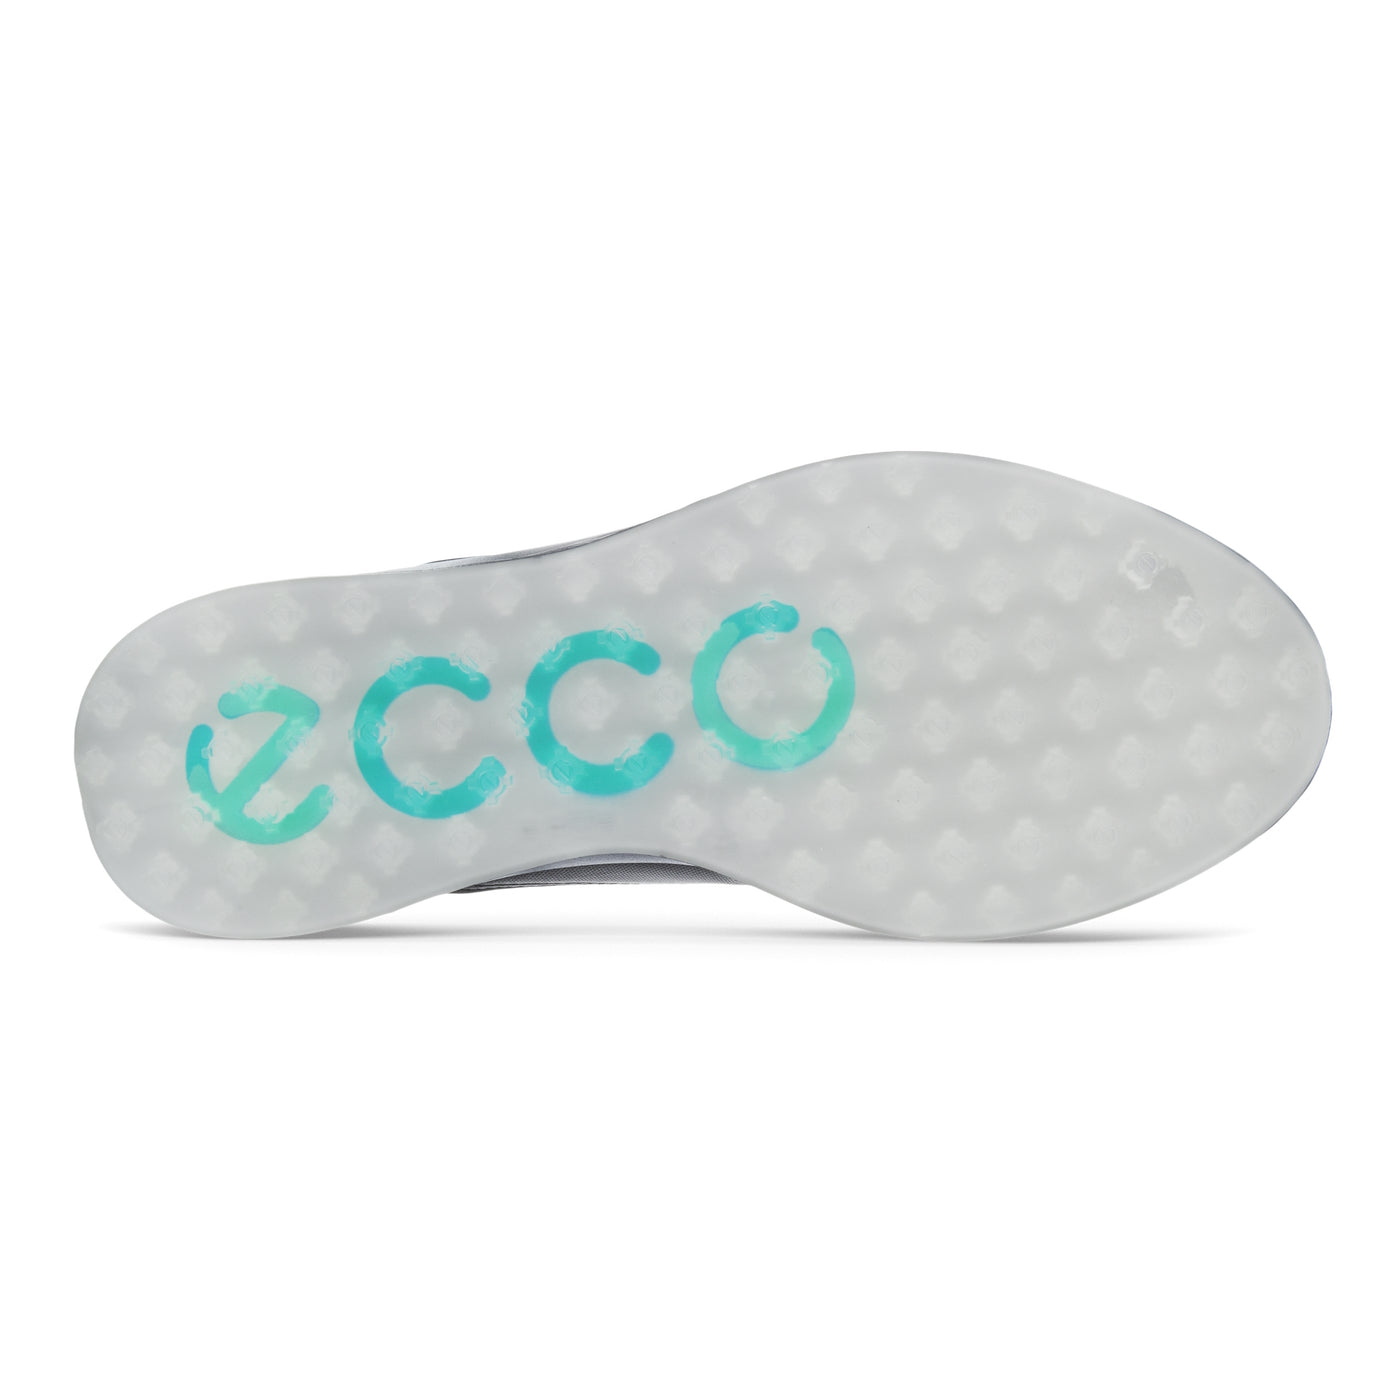 Ecco Men's S-Three Spikeless Golf Shoes